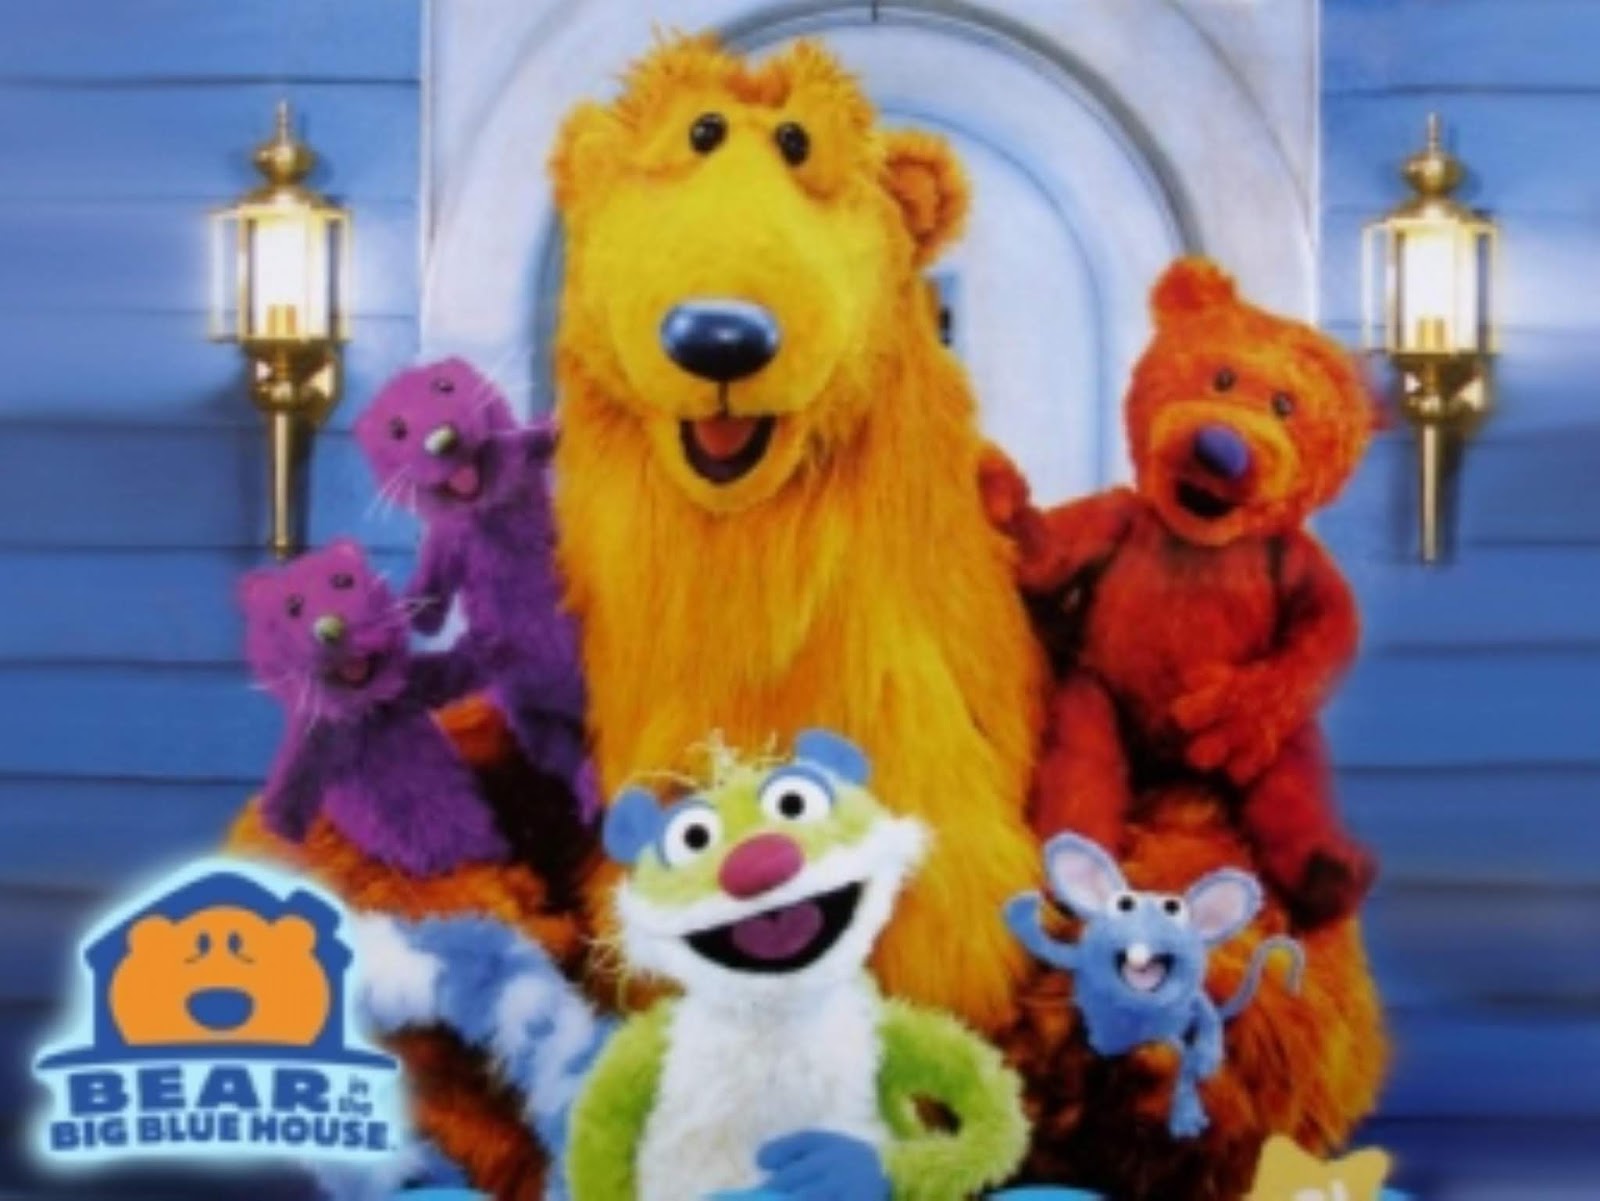 Bear in the big blue house water water everywhere